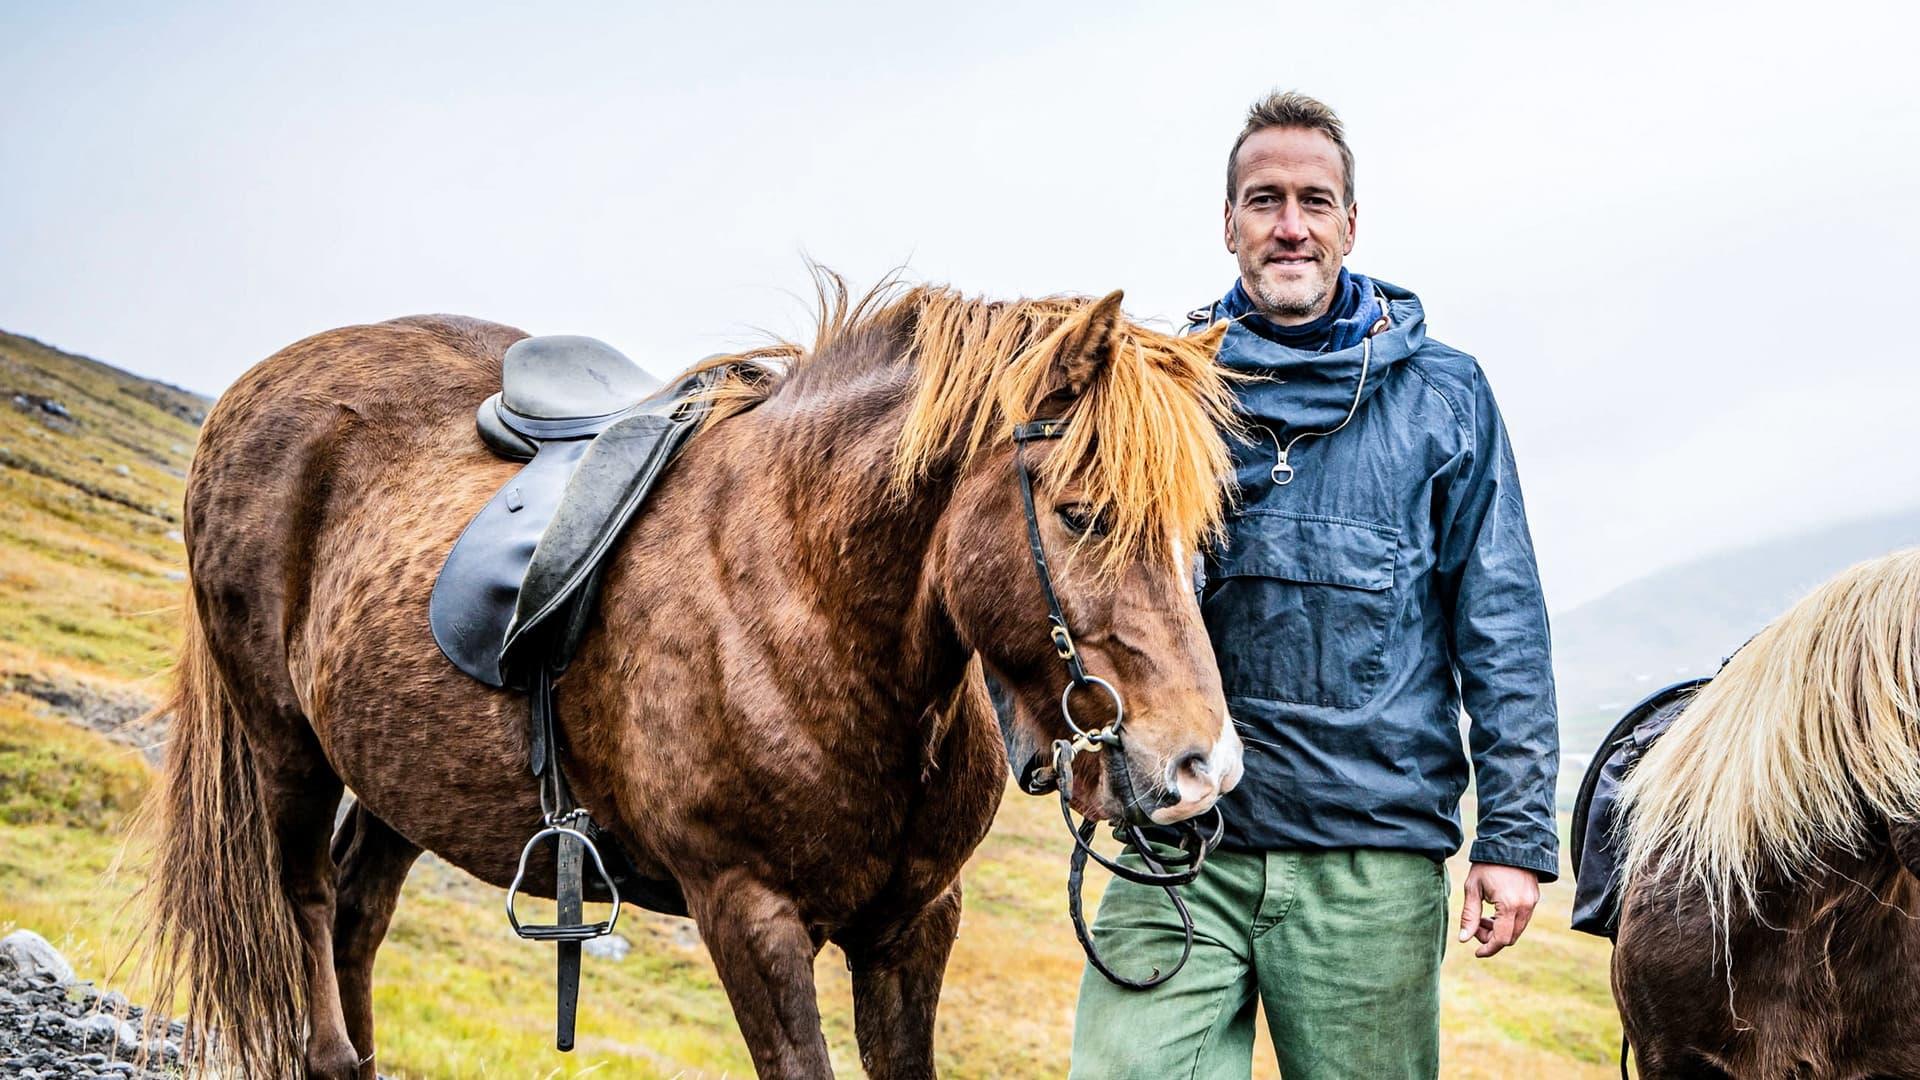 Ben Fogle: New Lives In The Wild backdrop